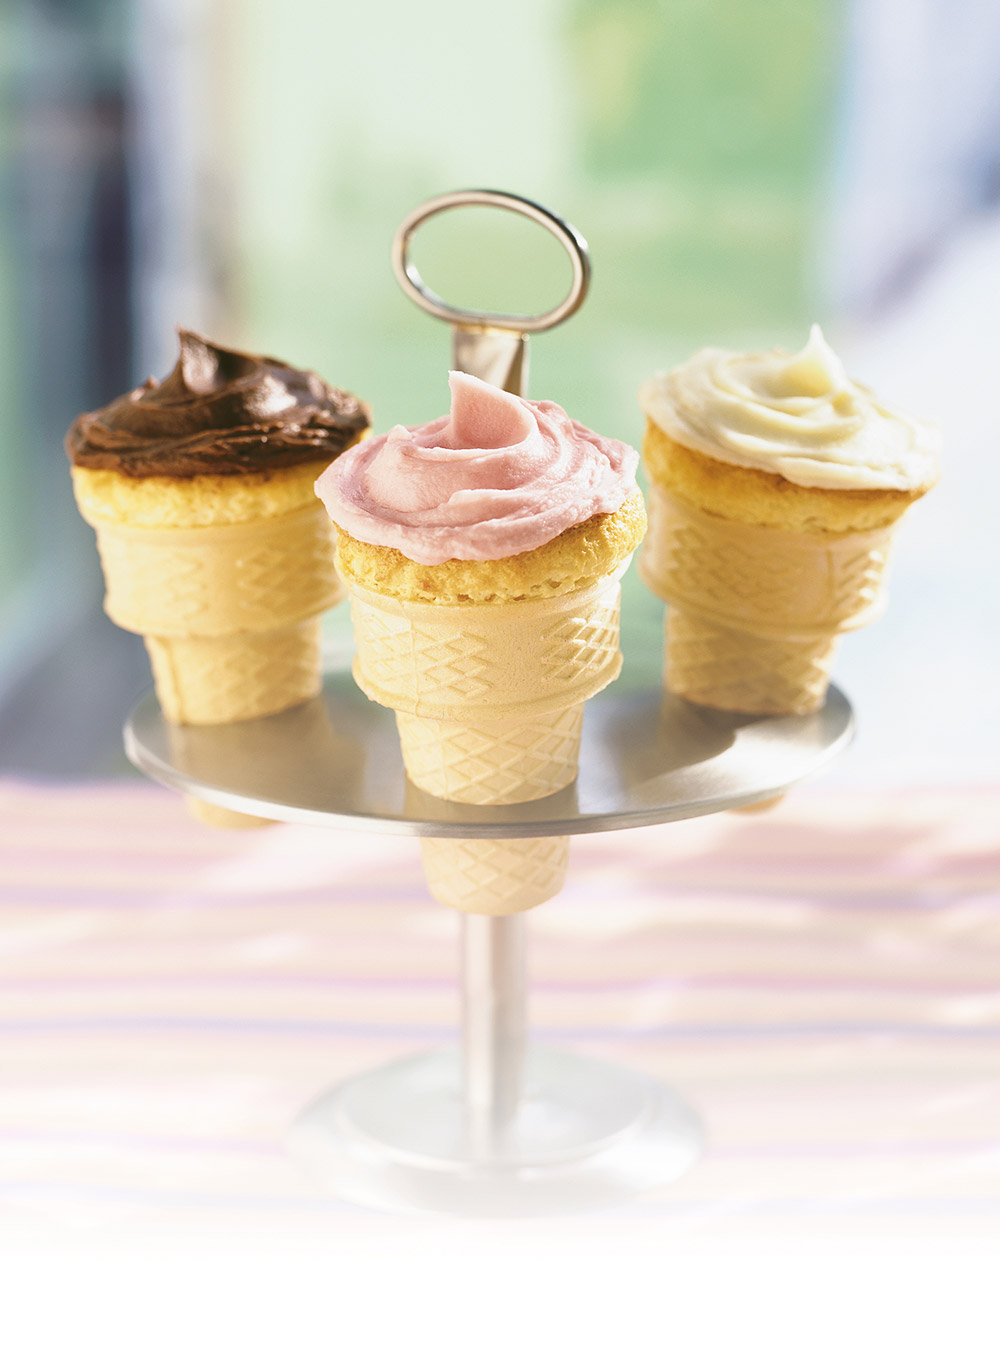 Frosted “Ice Cream” Cones